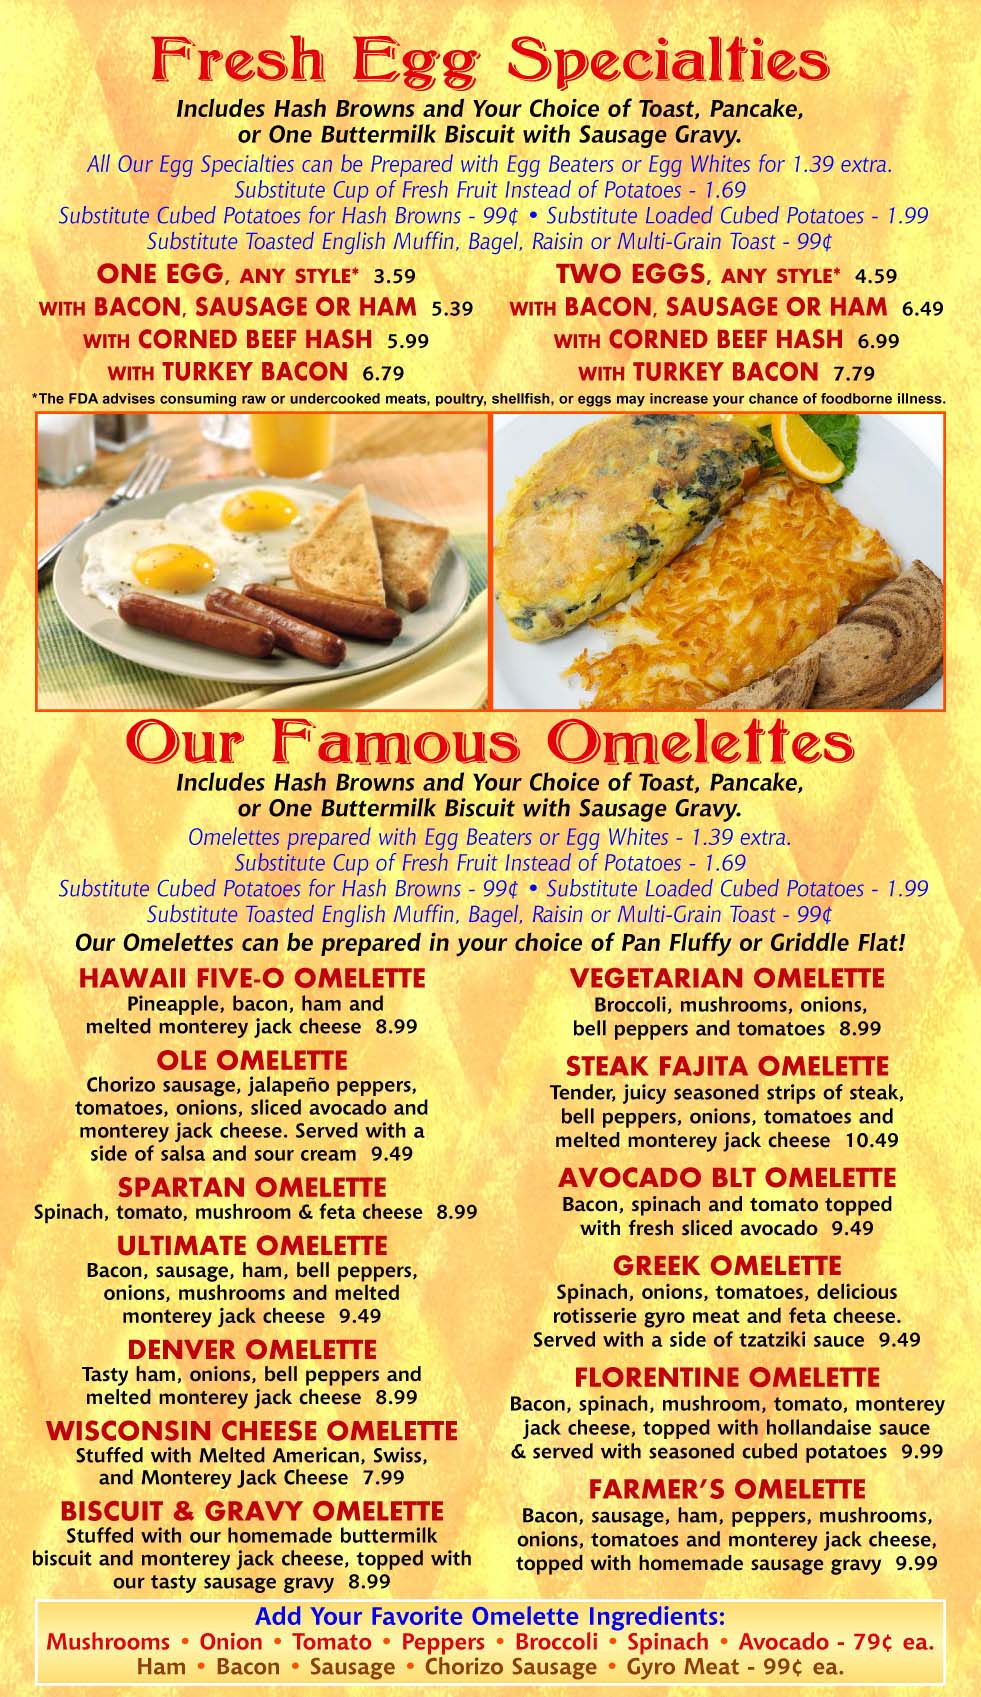 Egg Specialties, Omelettes